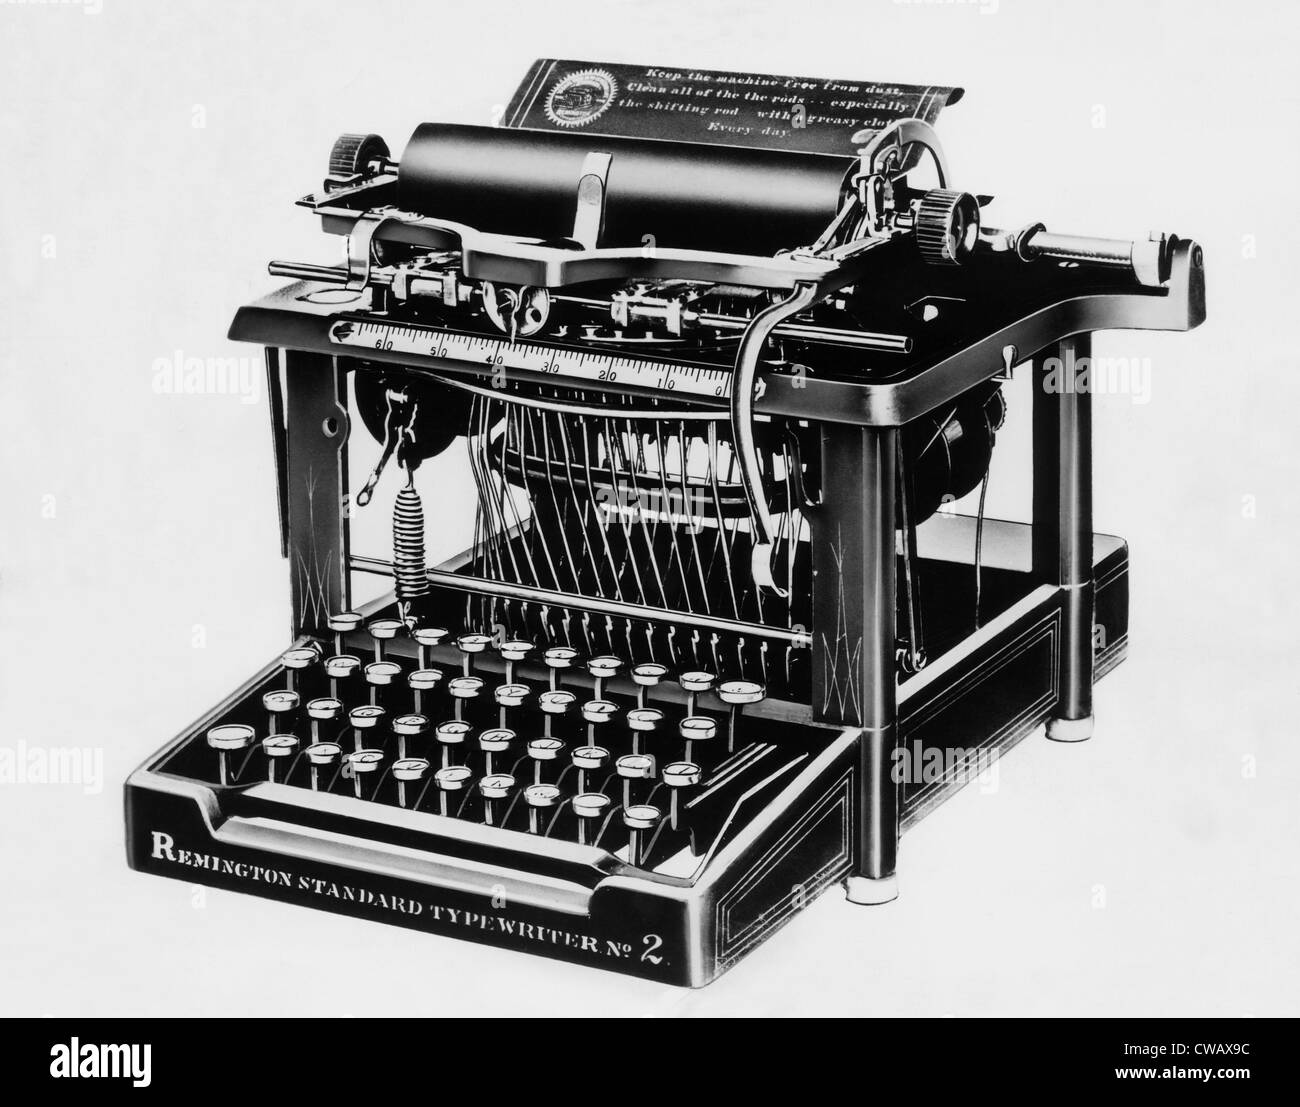 https://c8.alamy.com/comp/CWAX9C/the-remington-2-the-first-typewriter-capable-of-printing-lower-and-CWAX9C.jpg